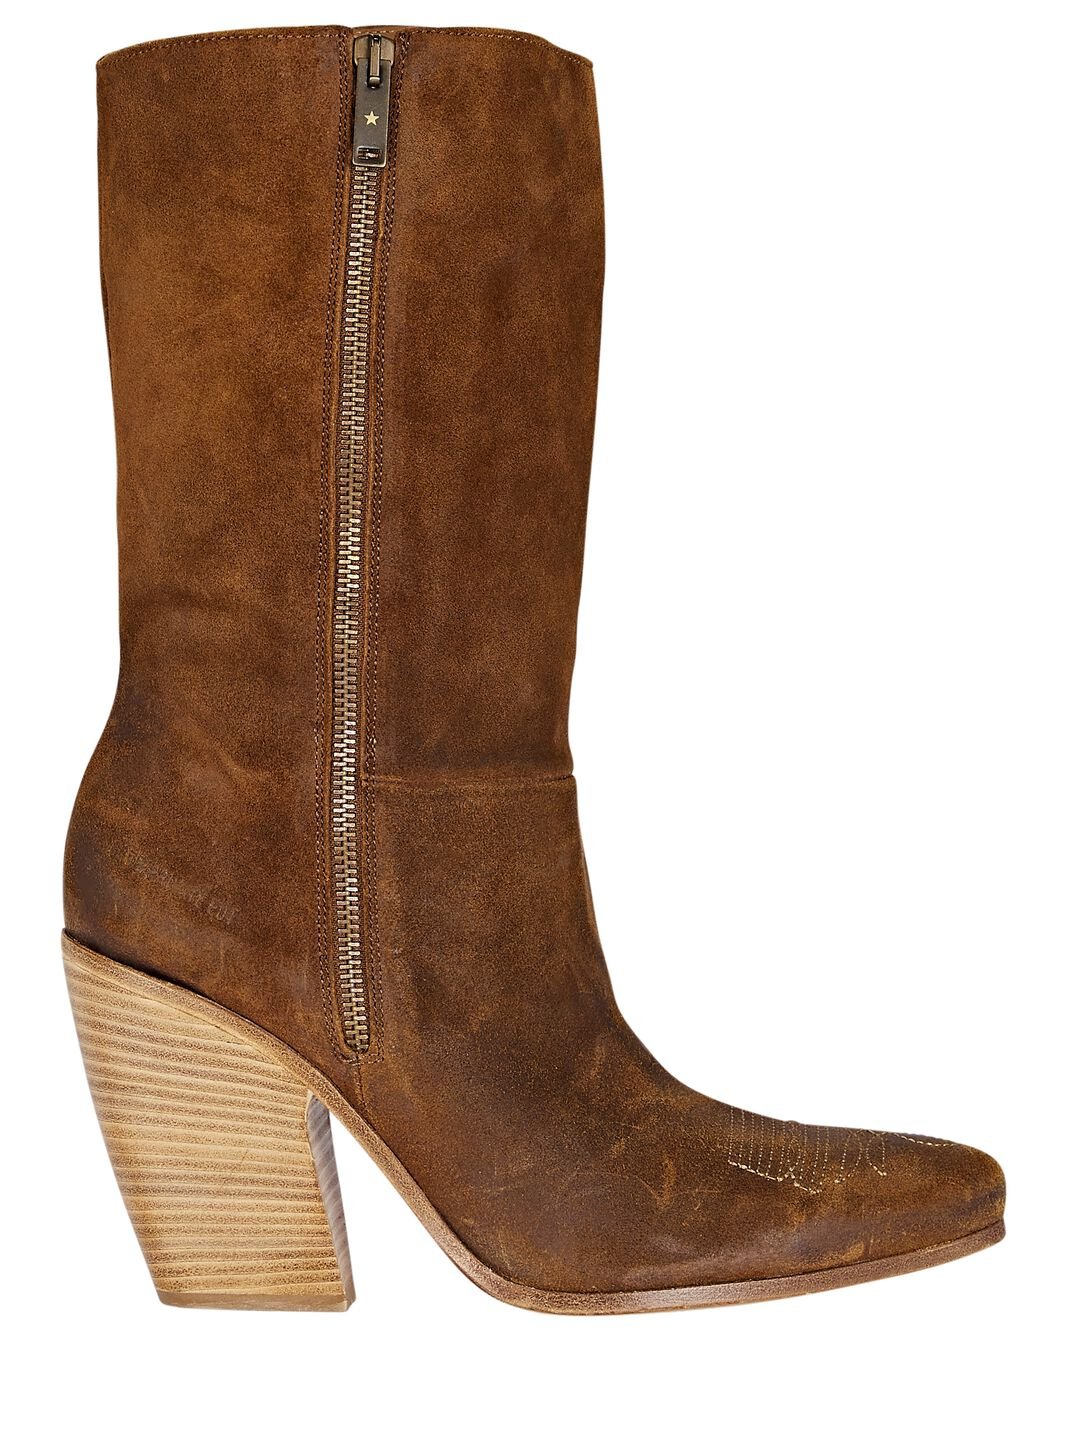 Candy Suede Cowboy Boots